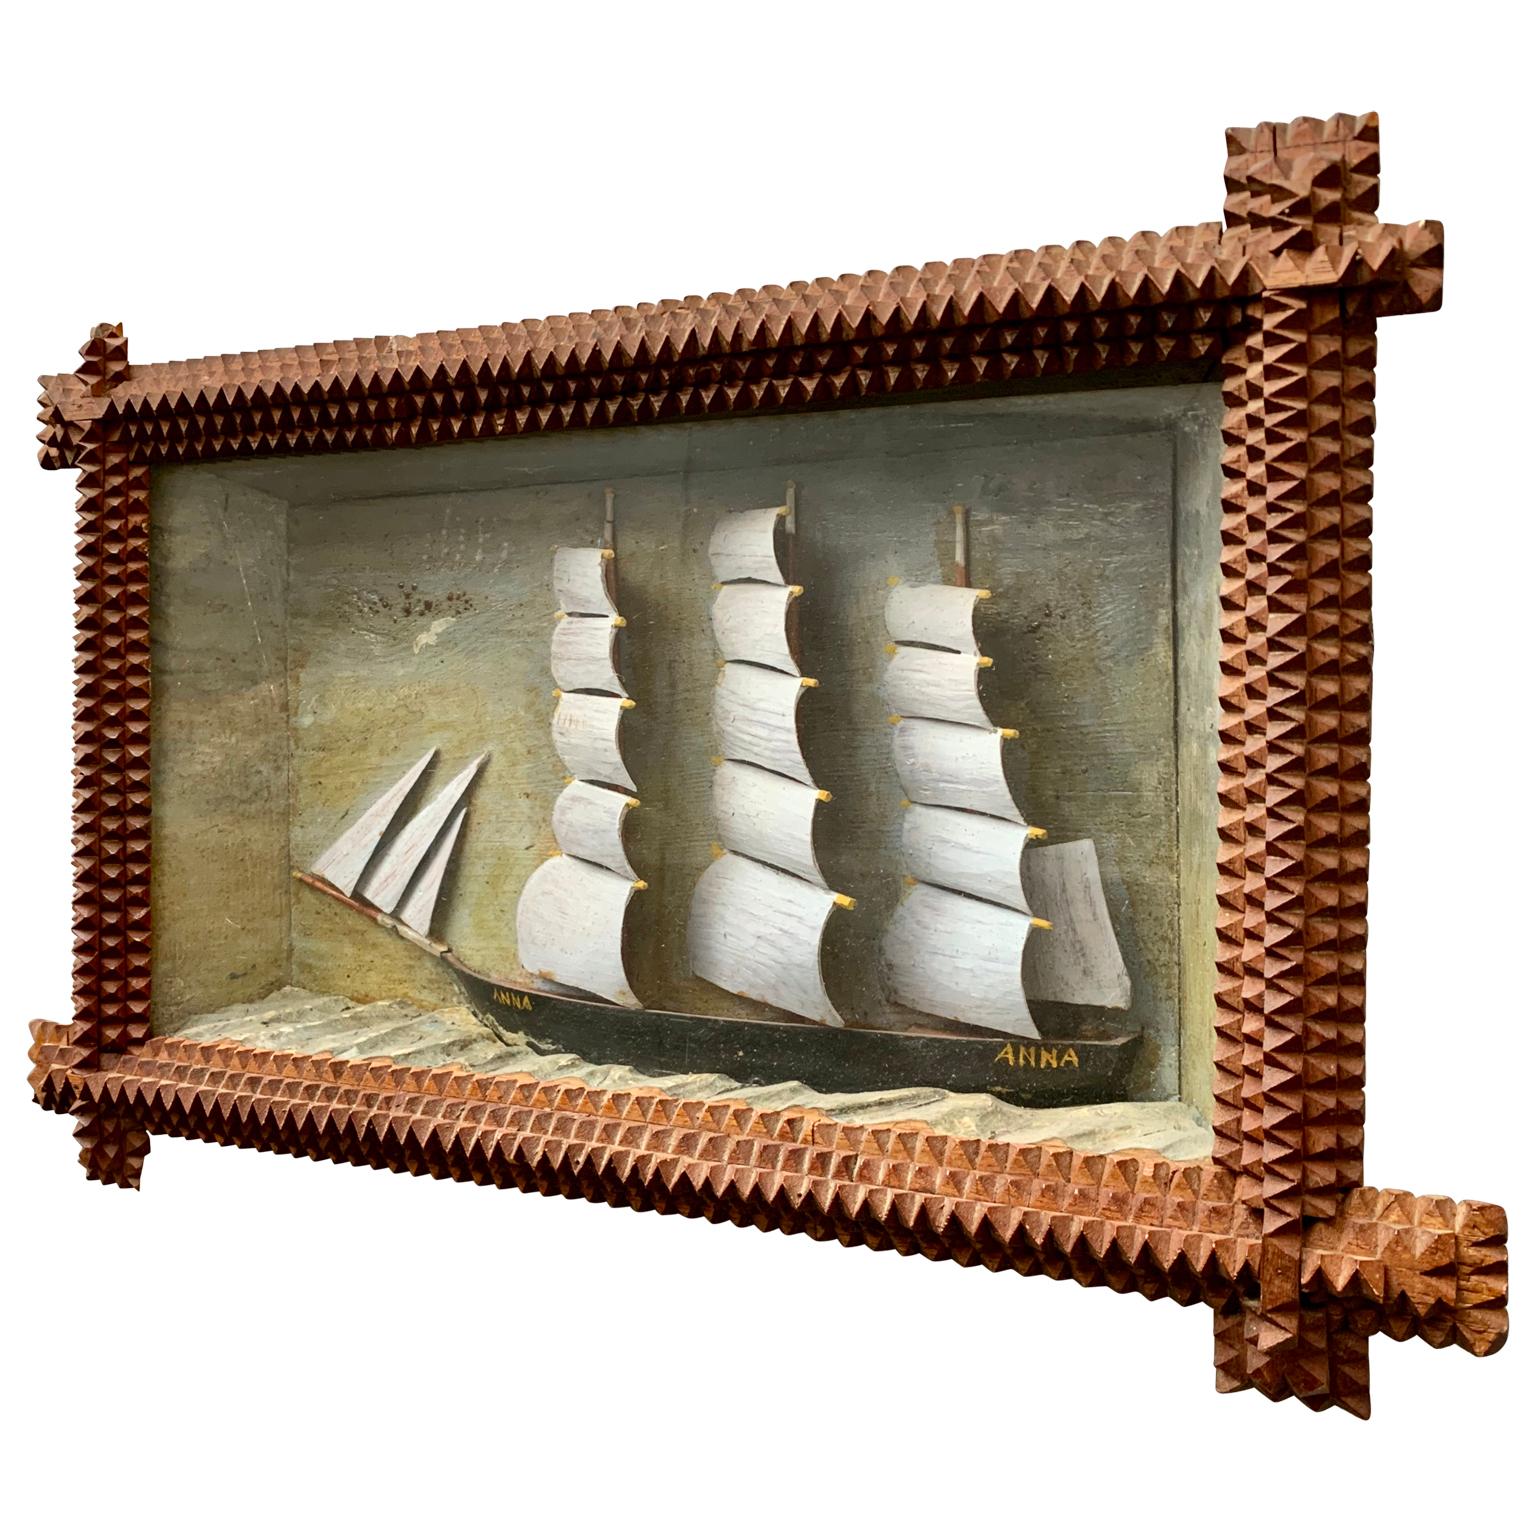 Hand carved, painted and sailor made ship model of the Swedish sailing ship Anna. With a typical seaman handmade frame.